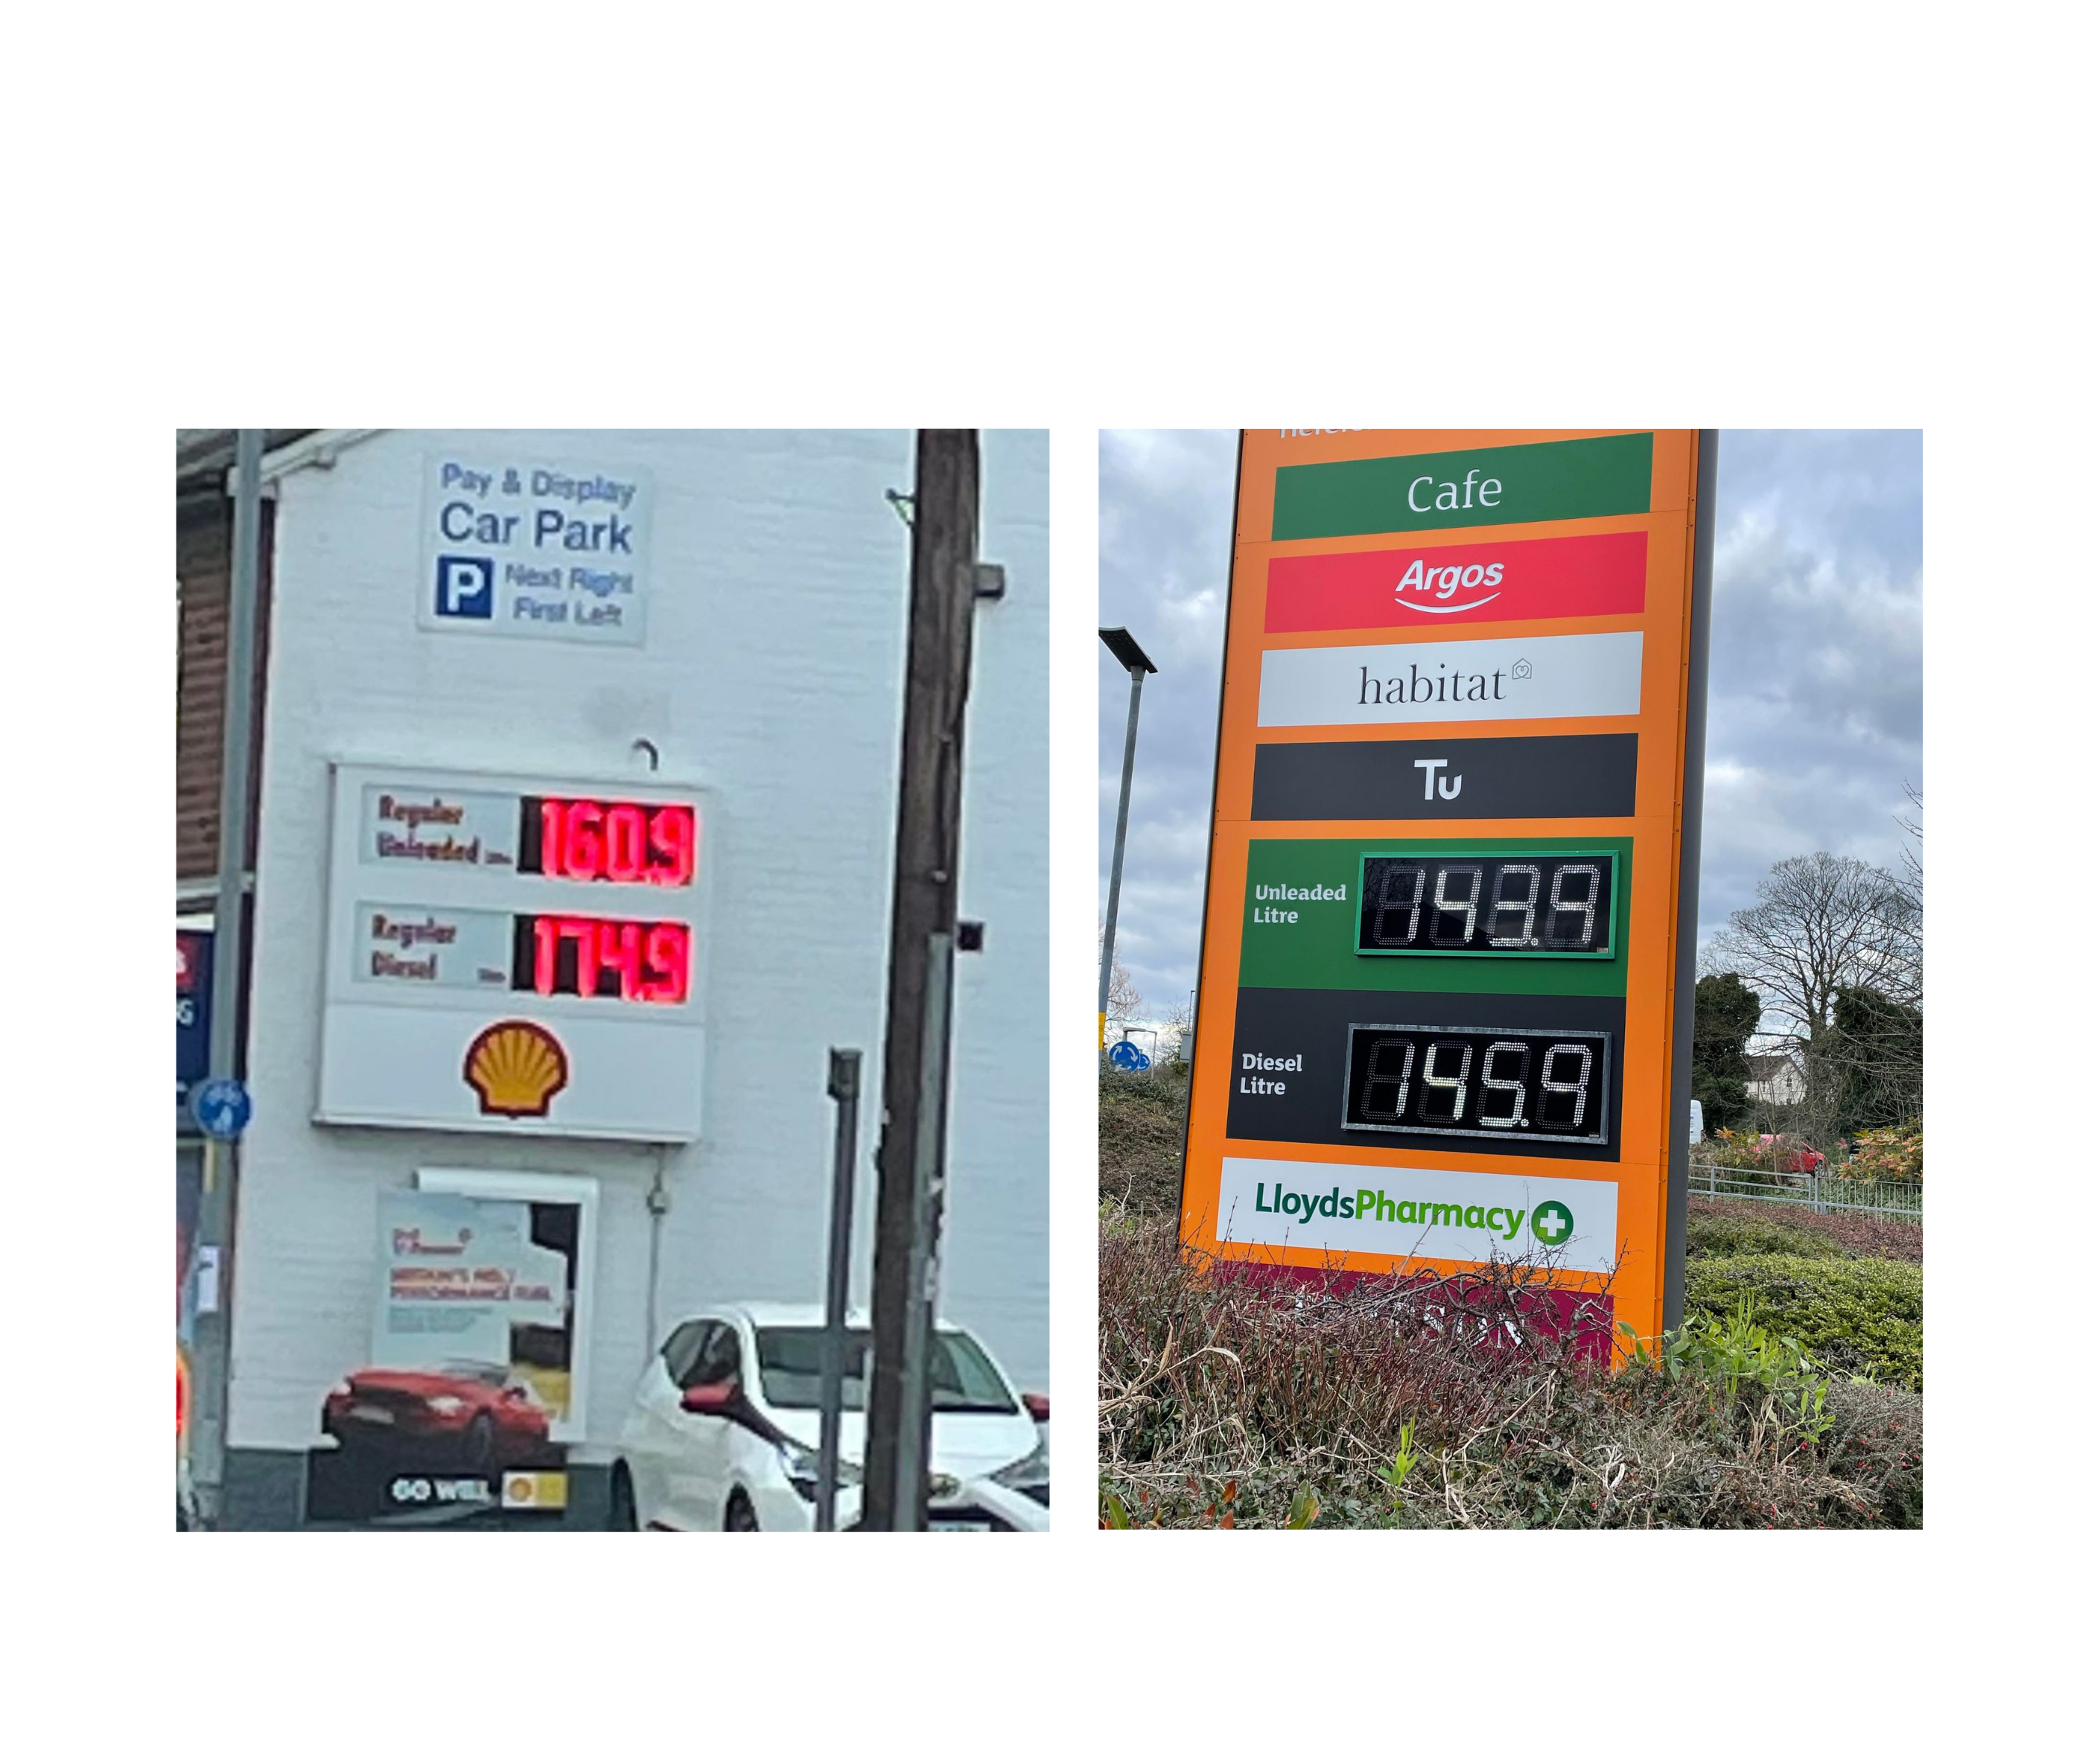 NEWS | Almost a 30p per litre price difference in price of diesel at two petrol stations just half a mile apart